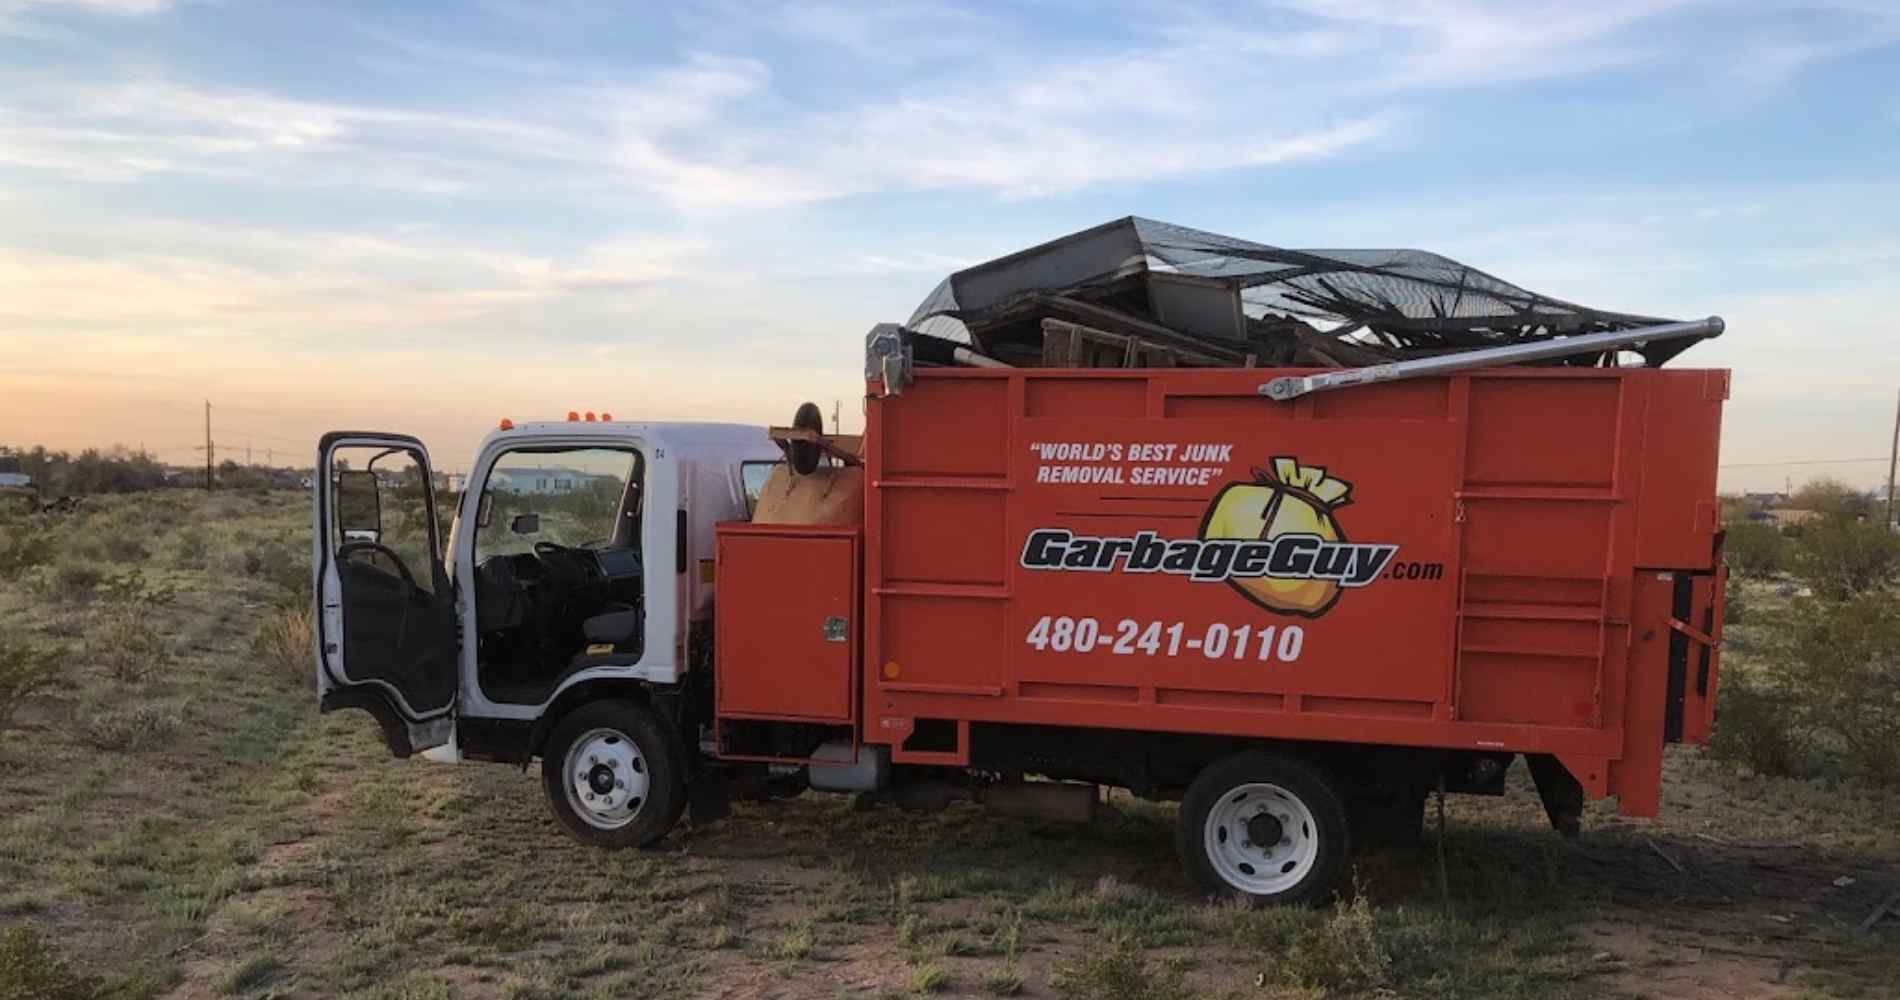 #1 for Junk Removal in Sun City, AZ with Over 1200 5-Star Reviews!